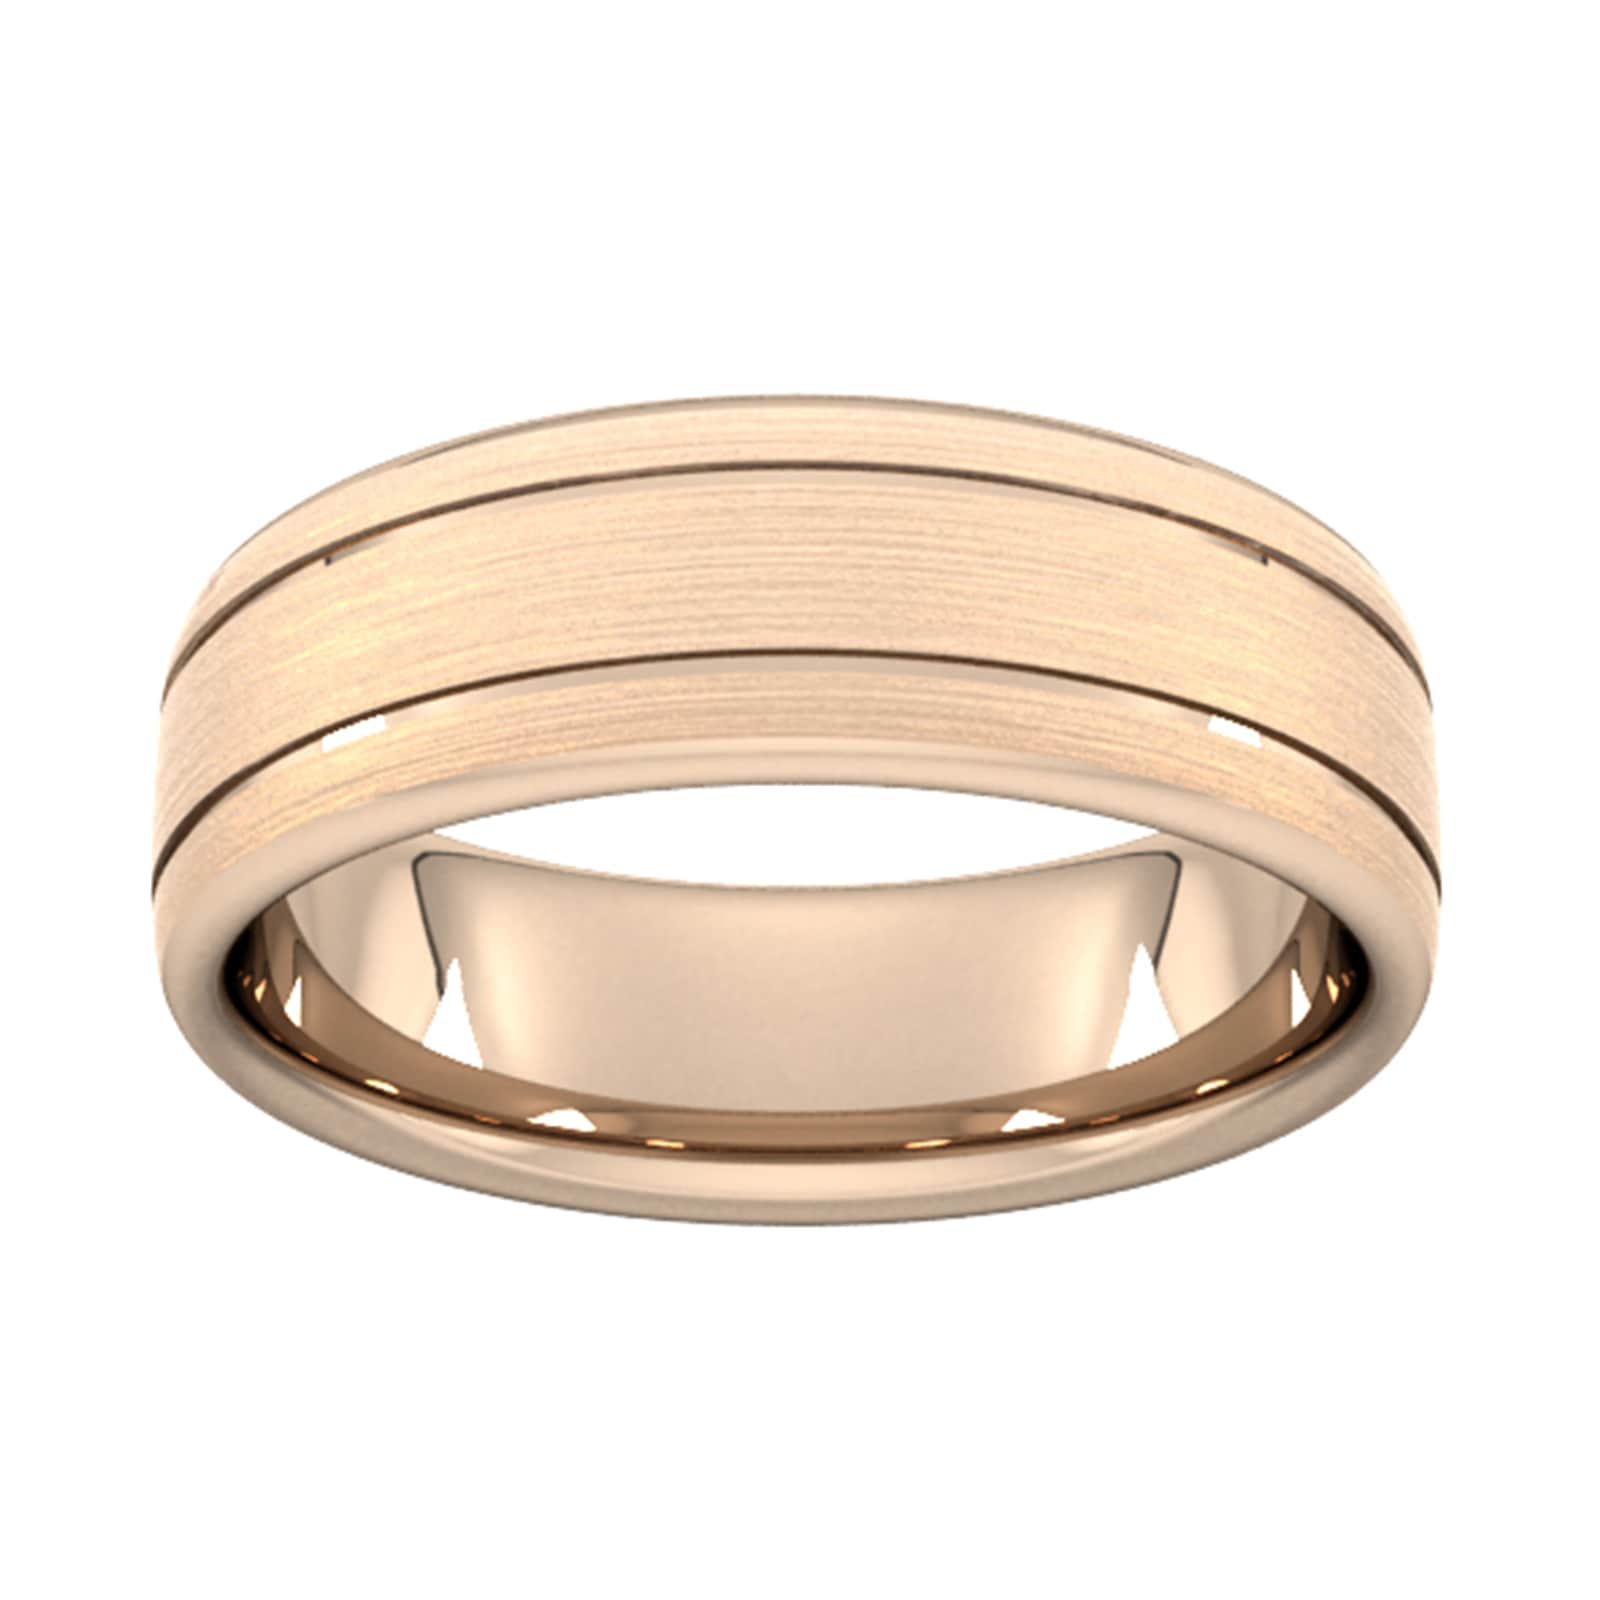 7mm Traditional Court Heavy Matt Finish With Double Grooves Wedding Ring In 9 Carat Rose Gold - Ring Size O